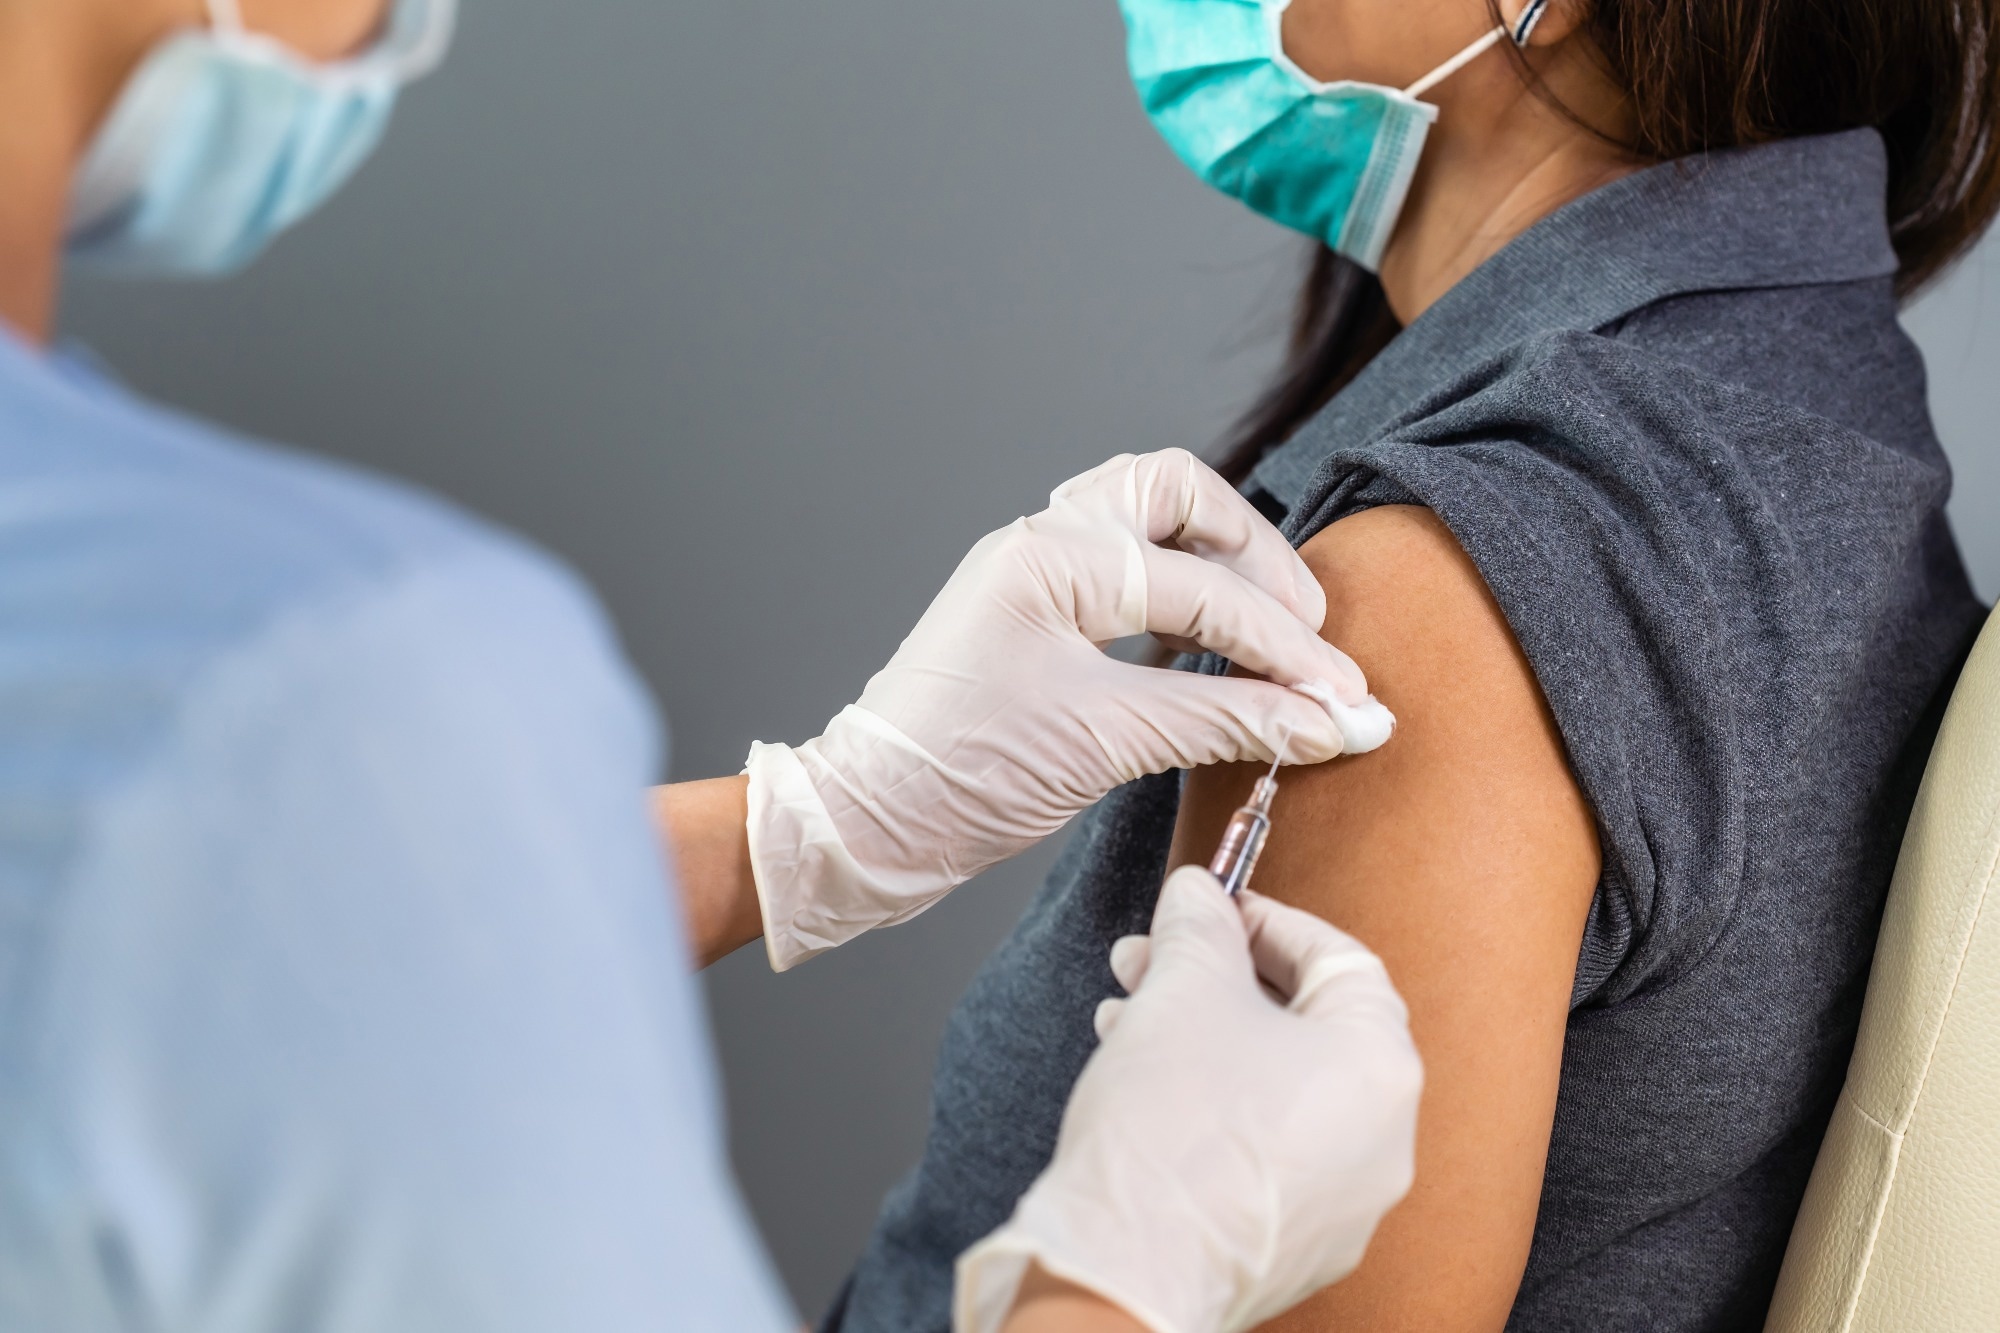 Study: Temporal Association Among Influenza-Like Illness, Cardiovascular Events, and Vaccine Dose in Patients With High-Risk Cardiovascular Disease. Image Credit: BaLL LunLa/Shutterstock.com